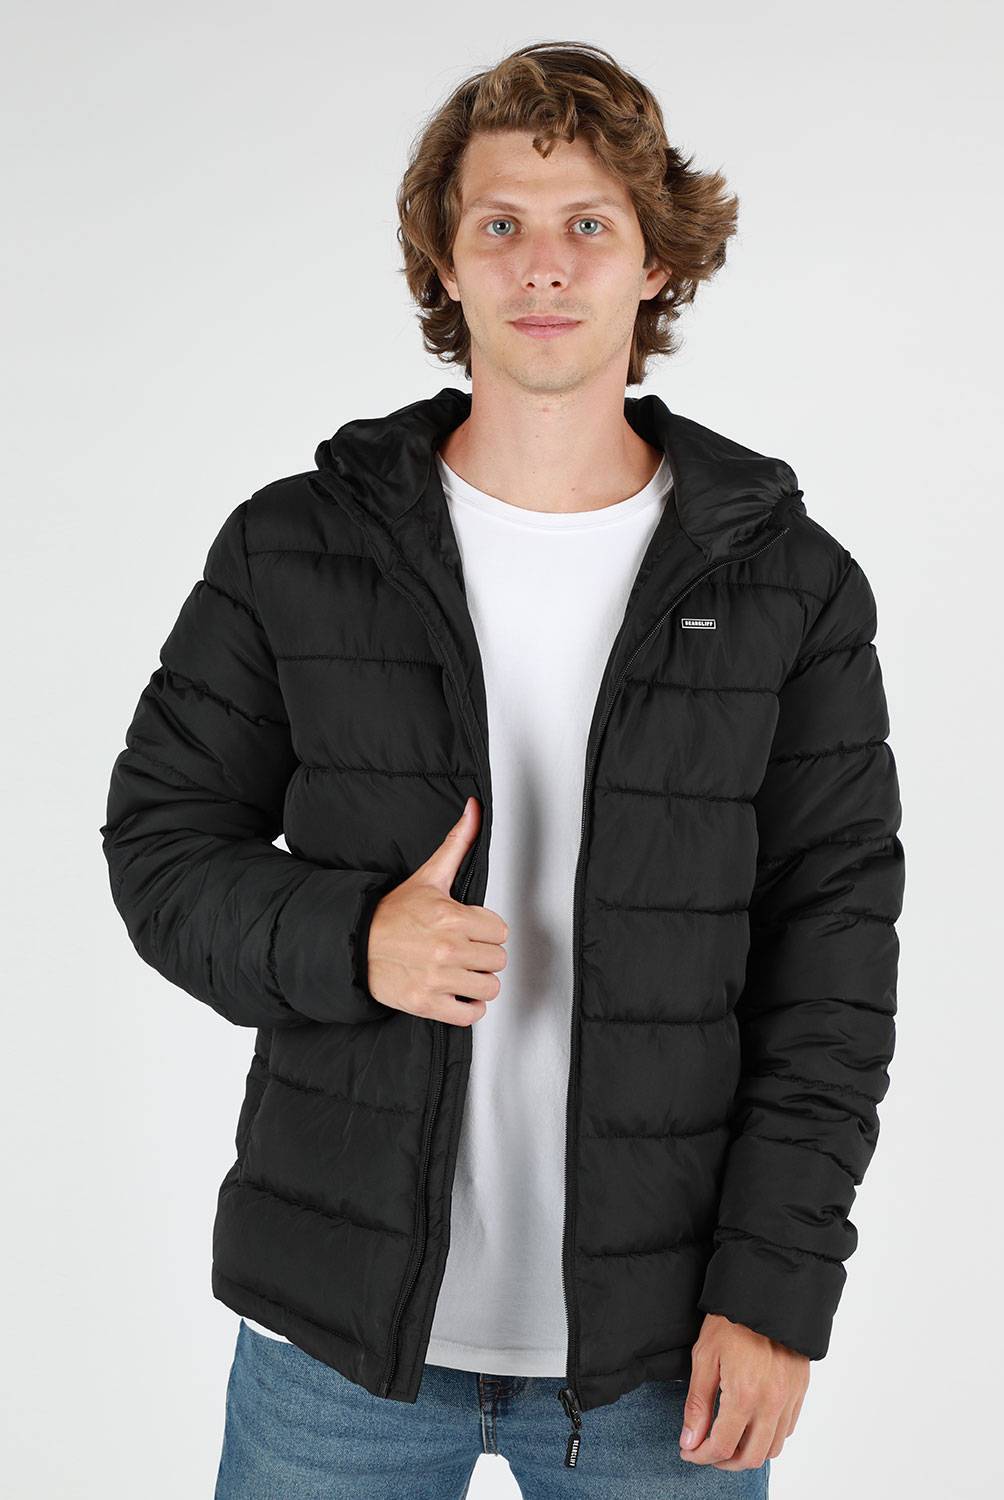 BEARCLIFF - Casaca Impermeable Hombre Bearcliff